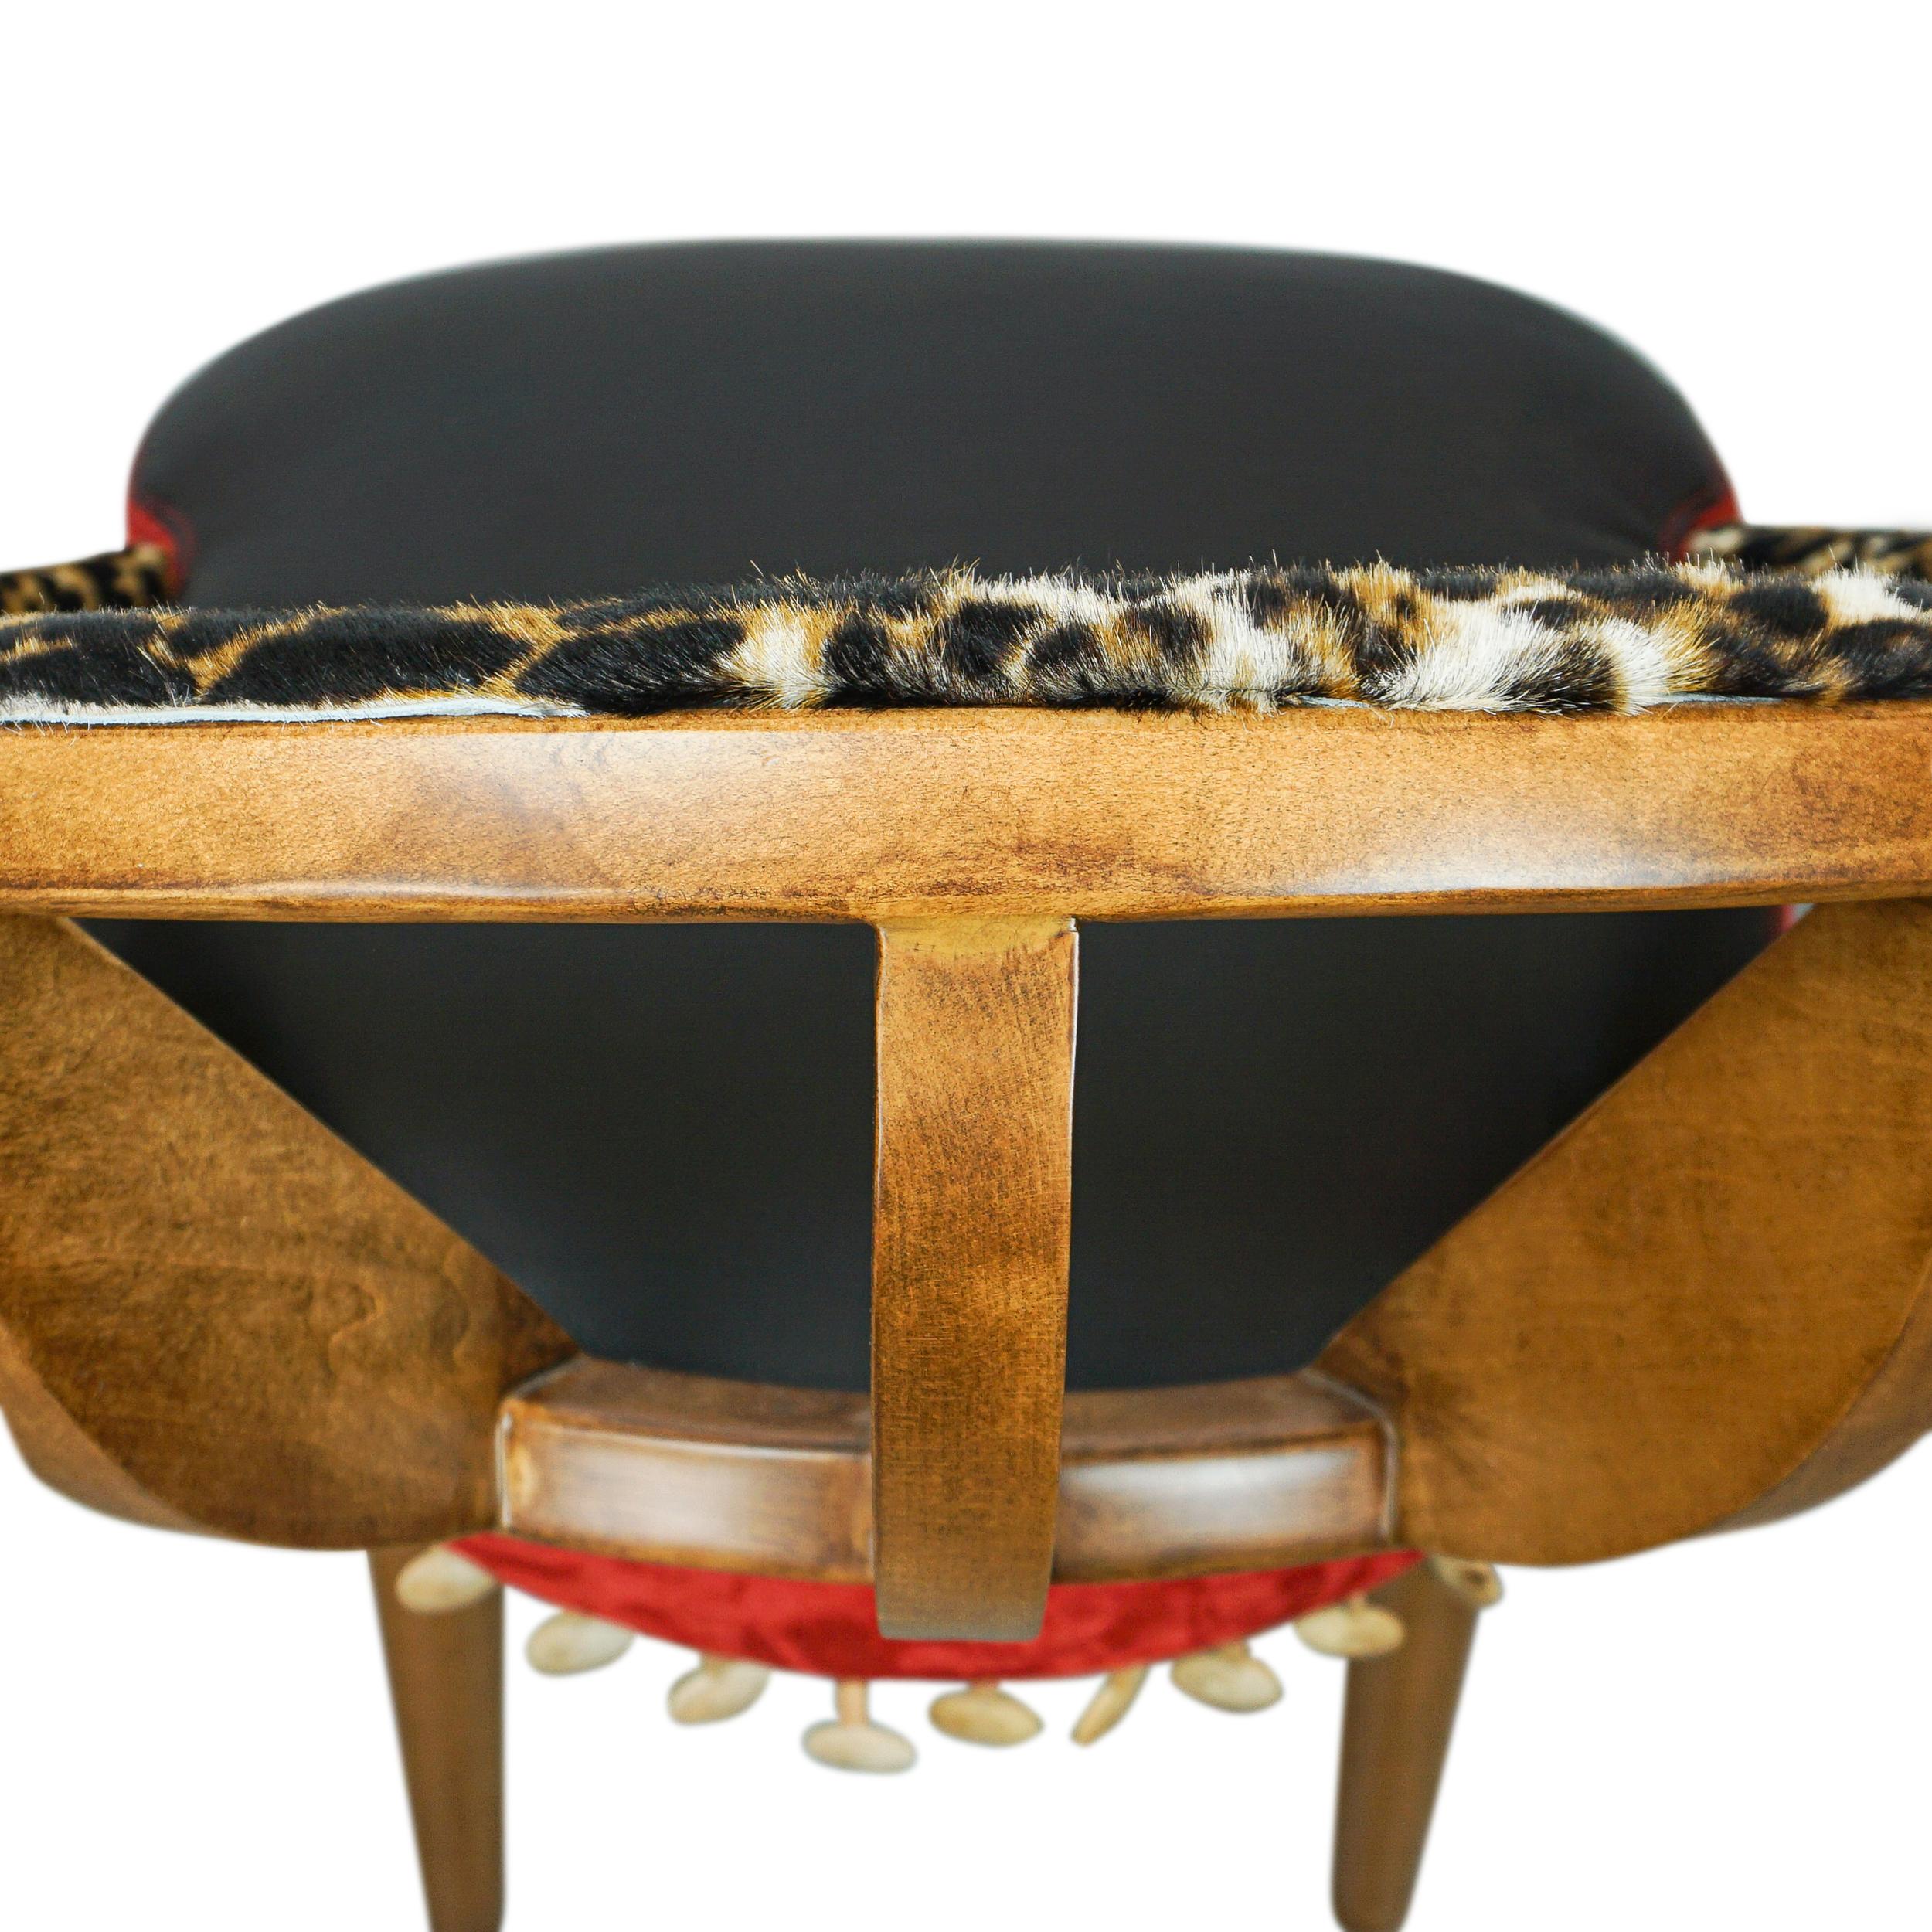 Ribbed Wood Chair with Cheetah Hair on Hide, Red + Black Leather and Wood Bead For Sale 8